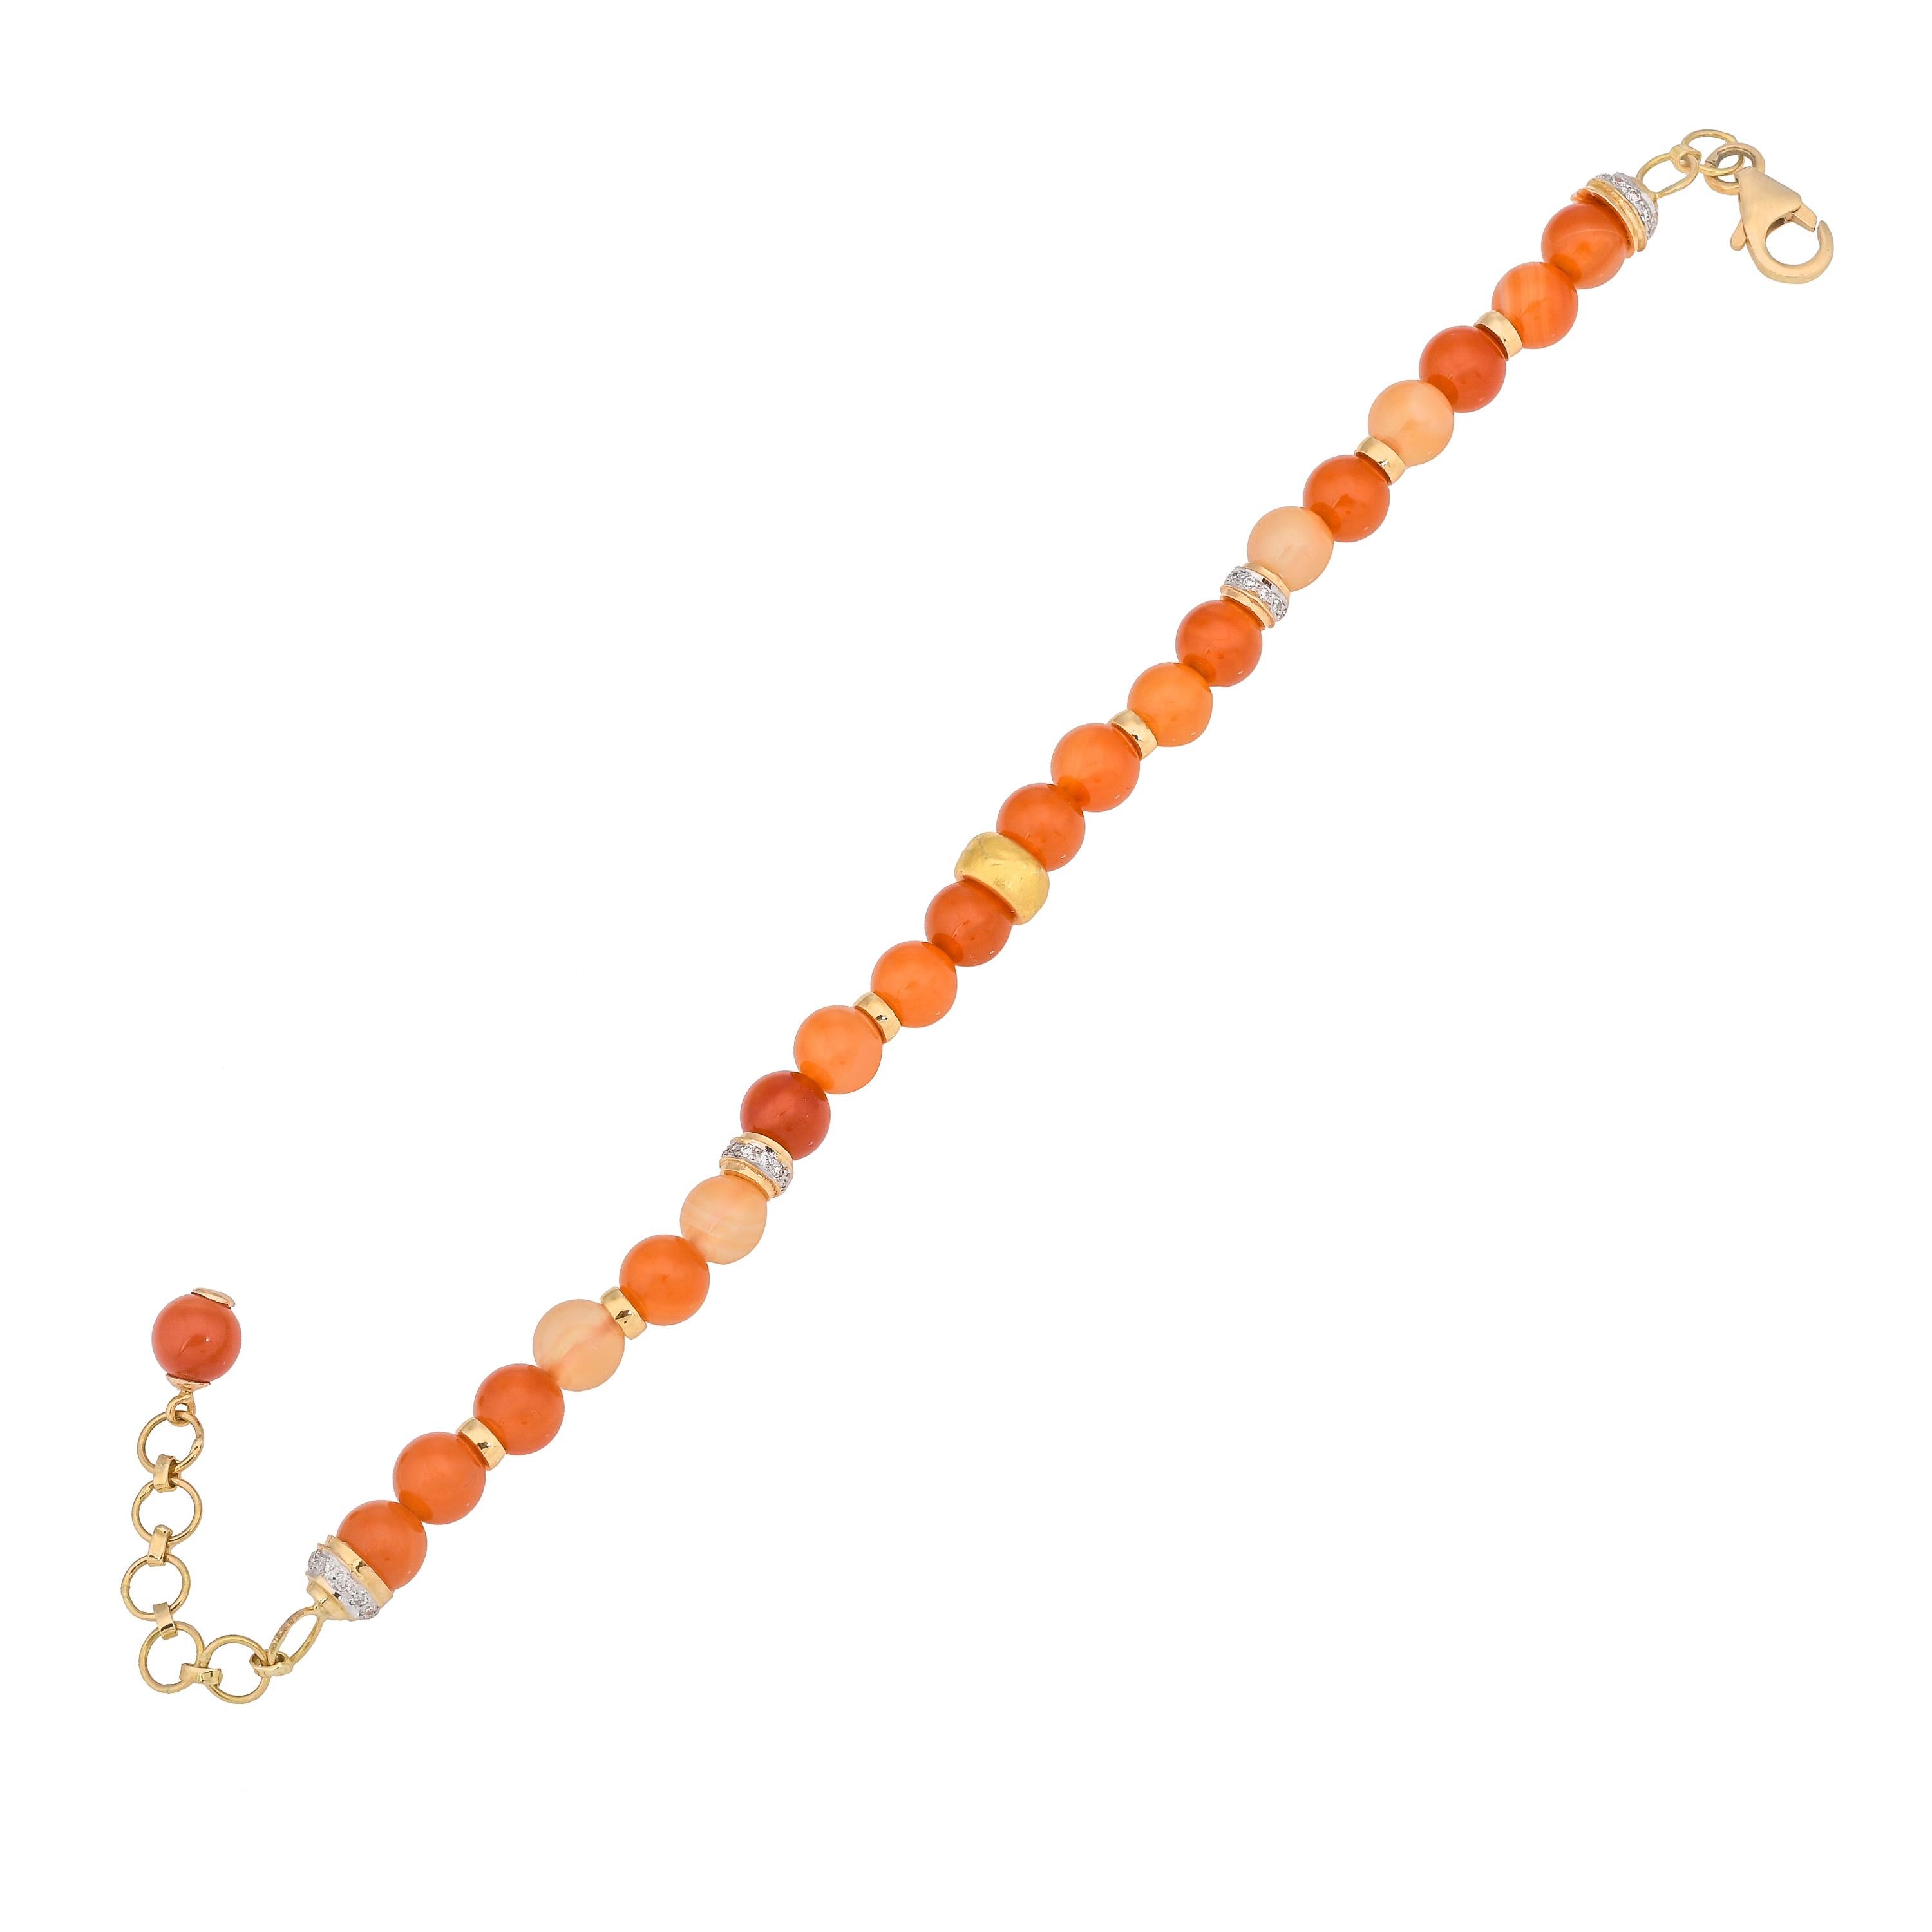 Bursting in a melange of colors as vibrant as the hues of galaxies by getting your hands on these luxurious customizable gemstone bracelet, handcrafted from carnelian balls weighing approximately 33.76 carats and further strung together with gold